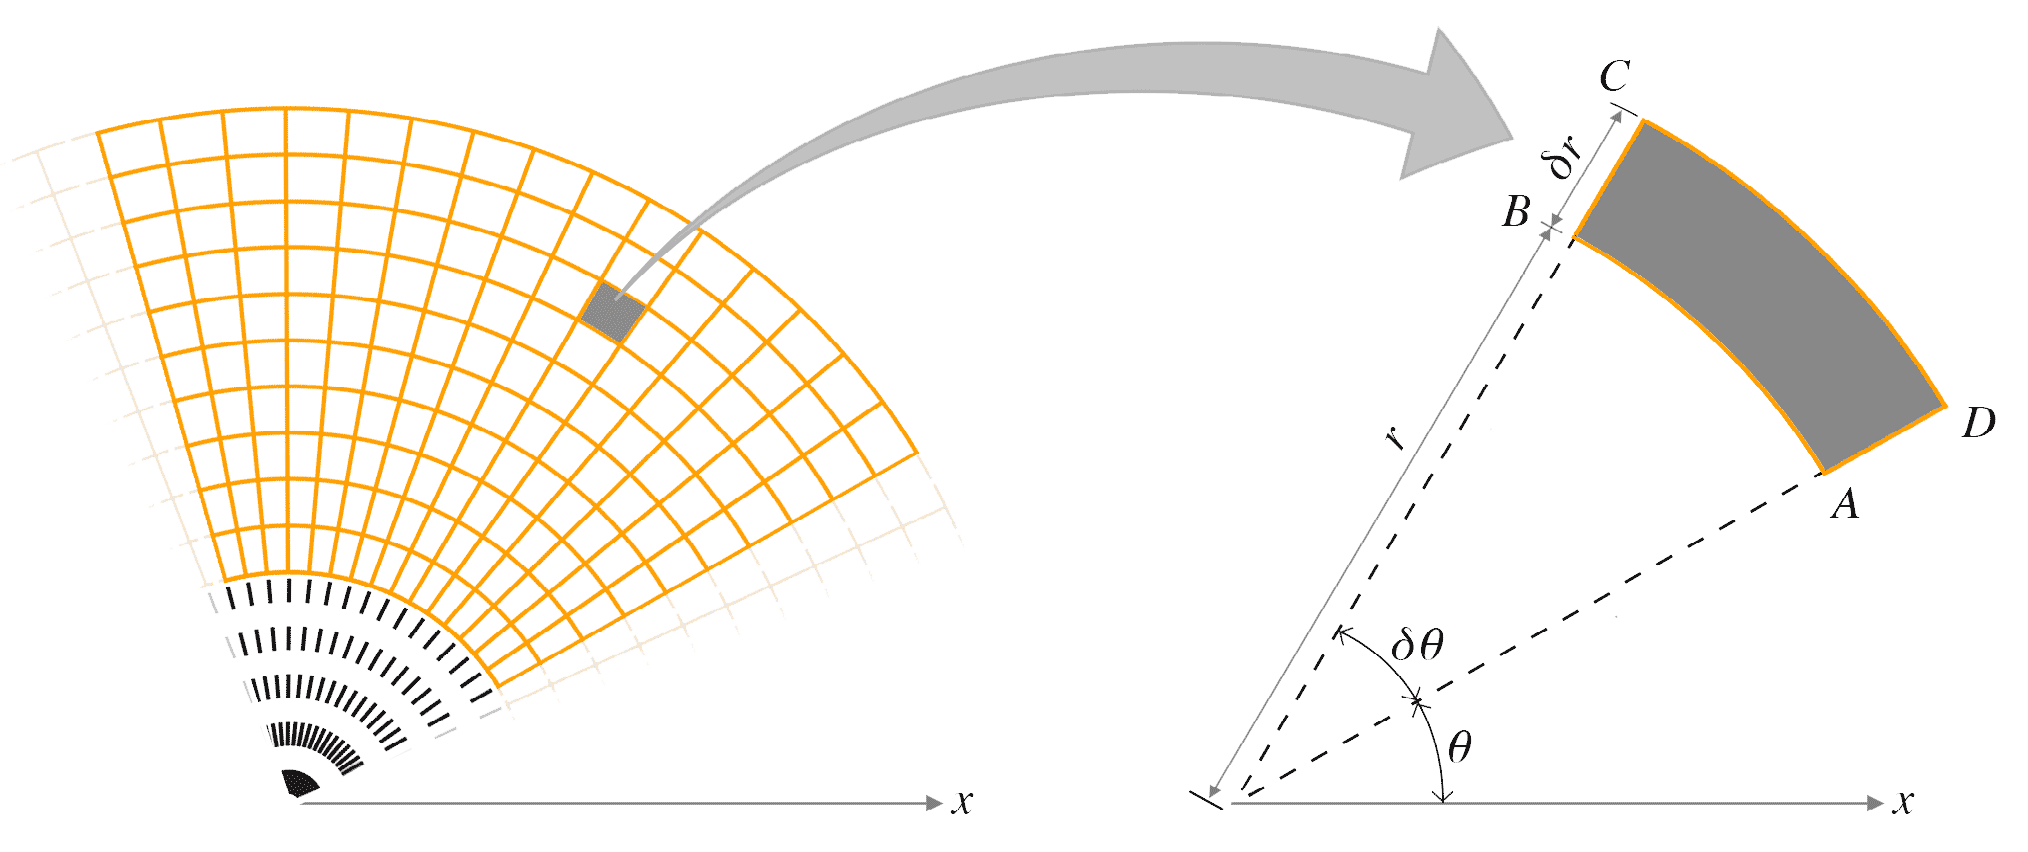 plane is partitioned using rays (radial lines) diagram